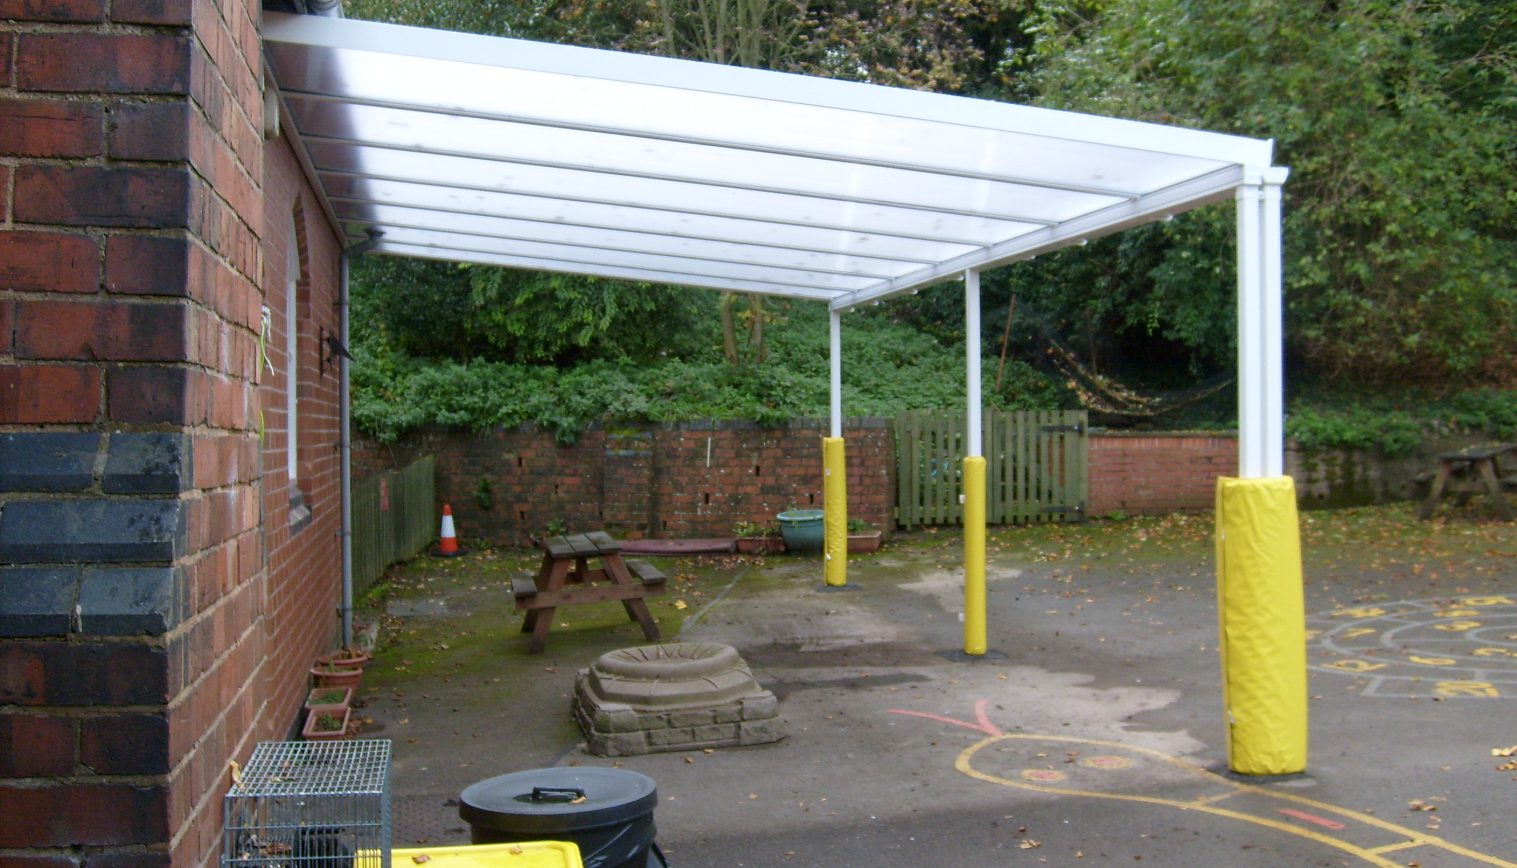 The Revel C of E Primary School – Wall Mounted Canopy